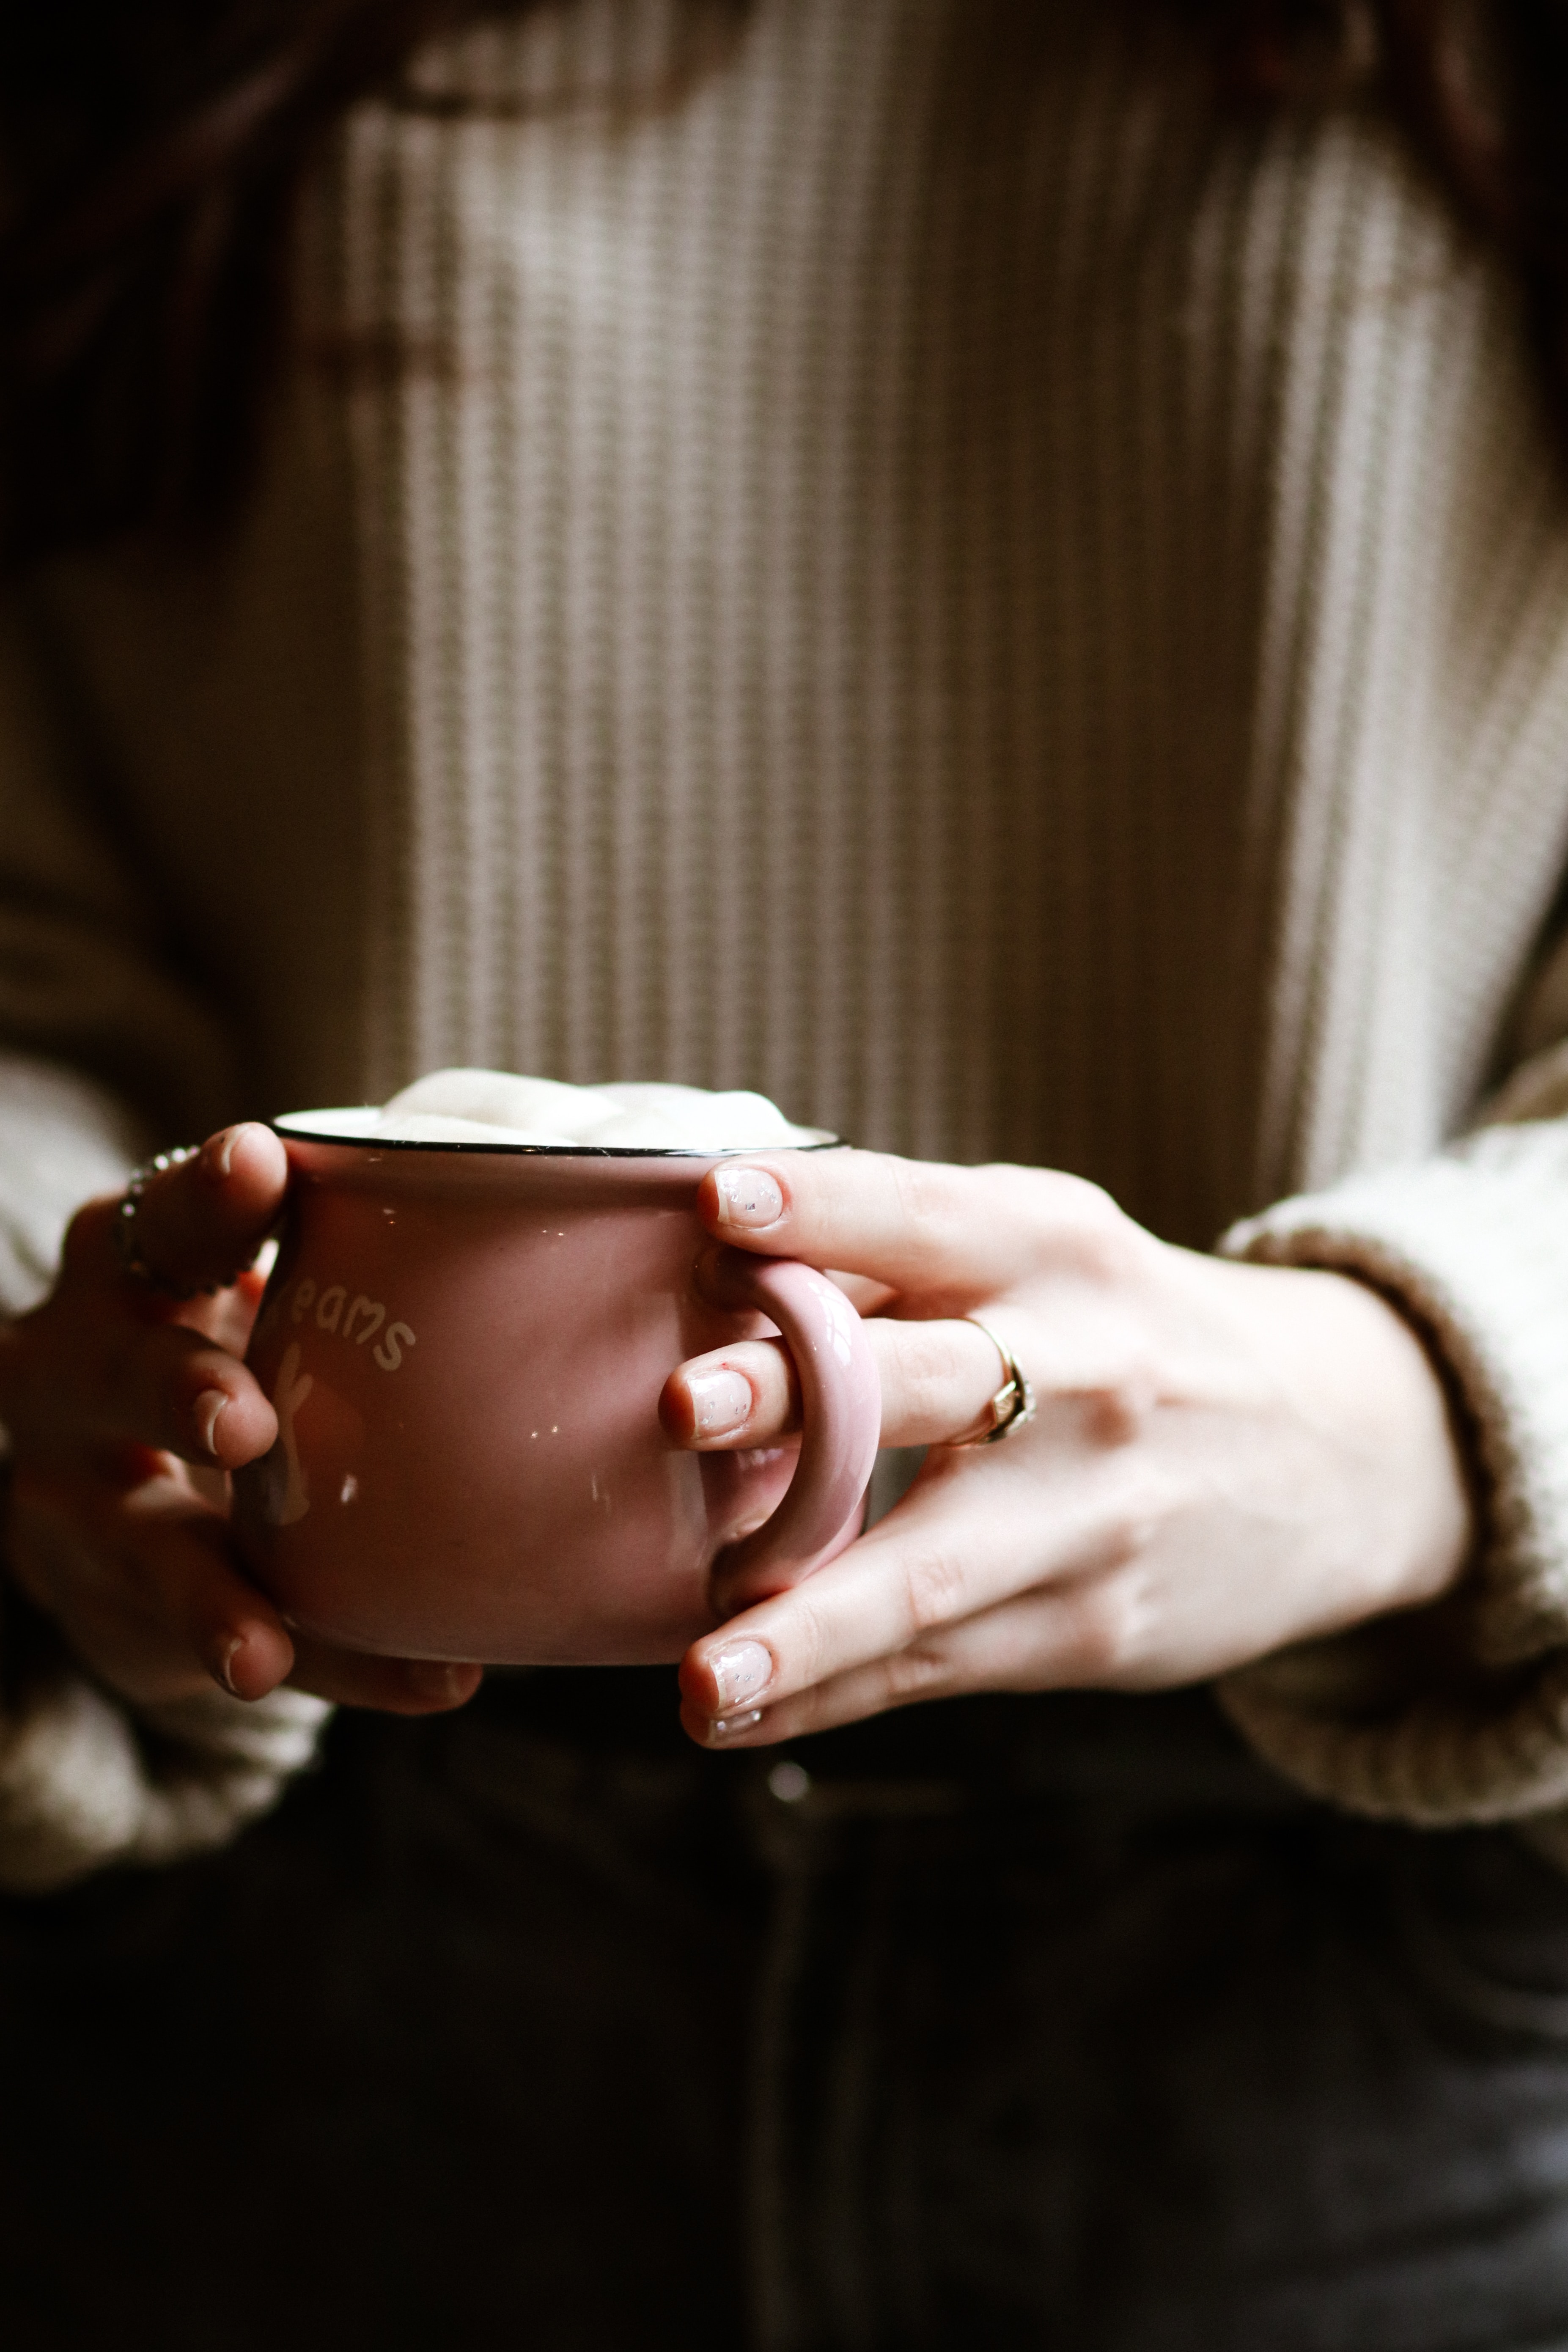 hands, coffee, miscellanea, miscellaneous, cup, drink, beverage, fingers, mug 1080p